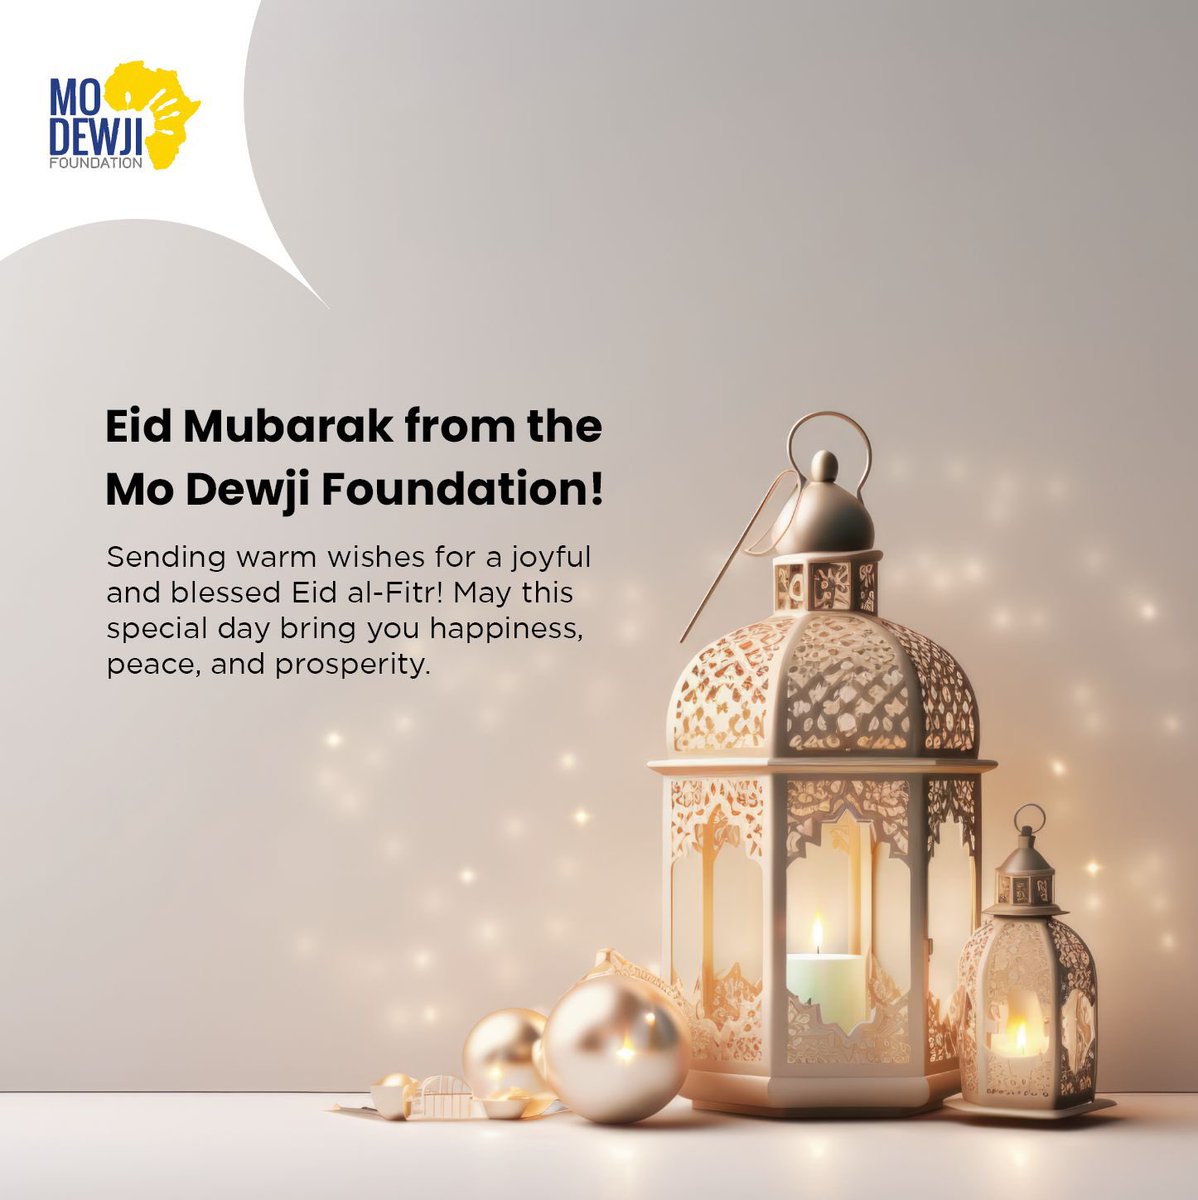 From all of us at the Mo Dewji Foundation, we extend warm wishes to you and your family on this joyous occasion of Eid el Fitri. May this special day bring you abundant blessings, happiness, and fulfillment. Let's continue to spread love, kindness, and hope to those in need,